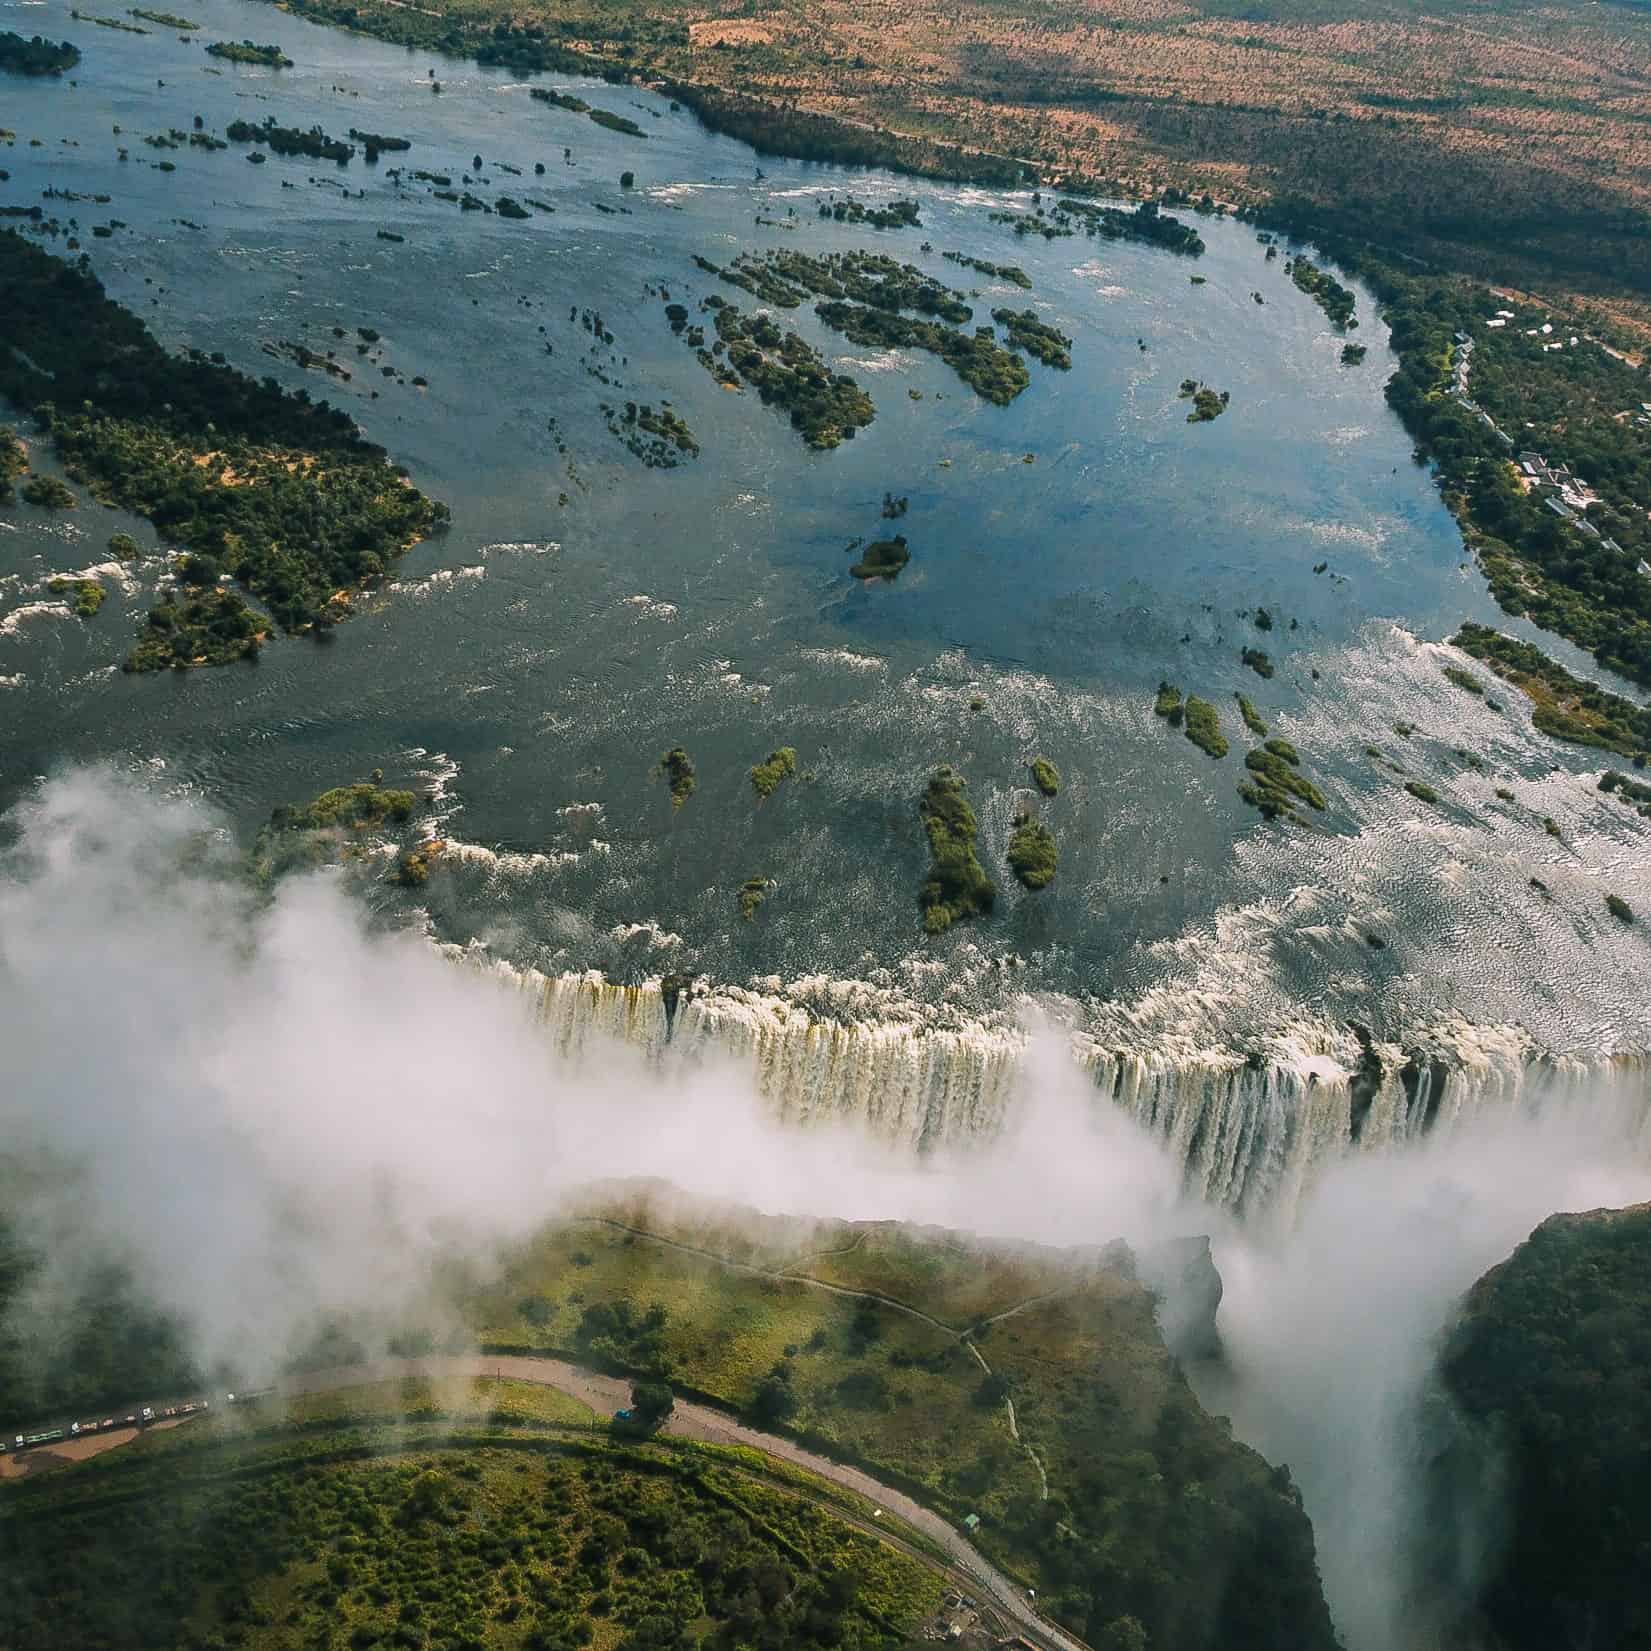 Flights from HARARE (HRE) to VICTORIA FALLS (VFA)